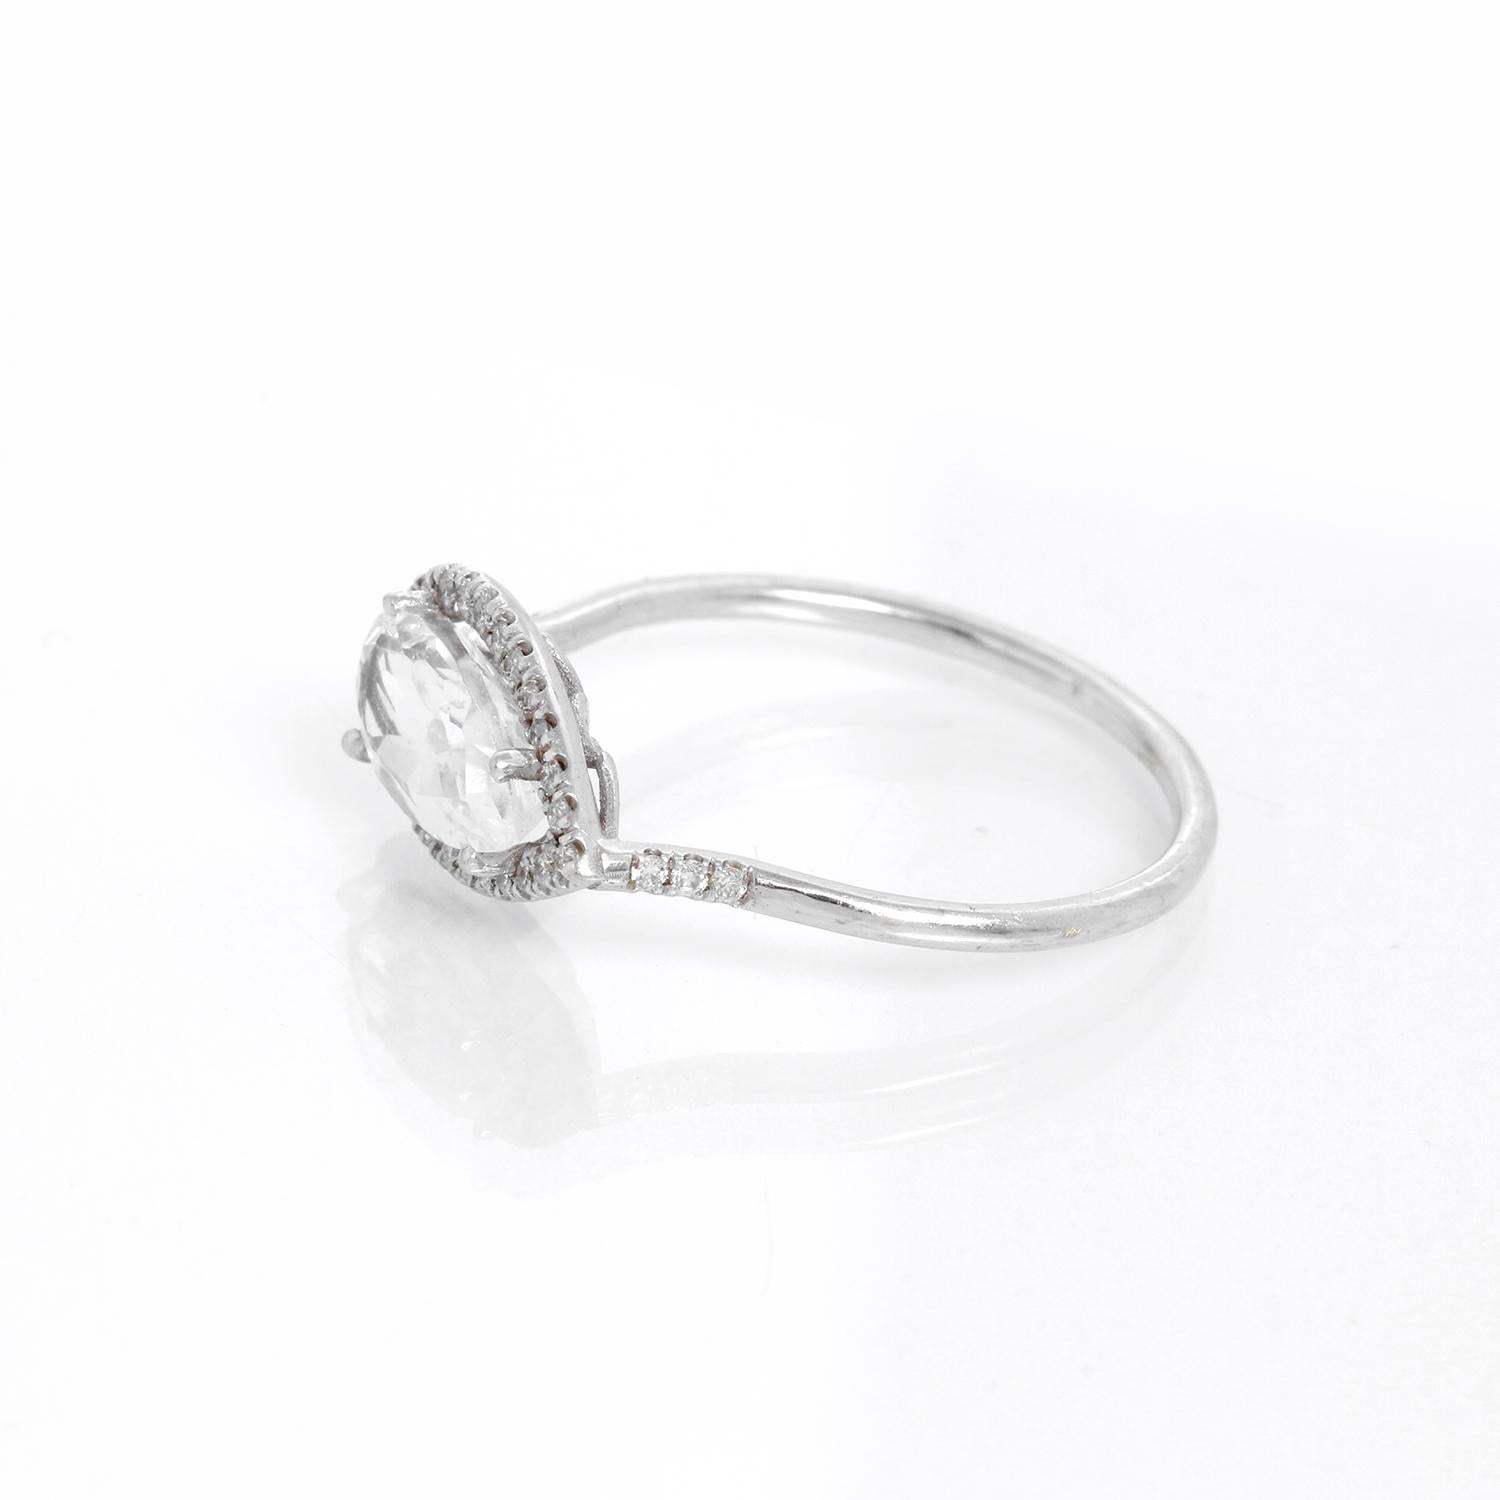 Pear Shaped Beryl & Diamond Ring Size 6.75  - 114K white gold ring with a center Beryl stone pear shaped measuring .20 cts . surrounded by  .2 cts of diamonds.  Total weight 1.6 grams .